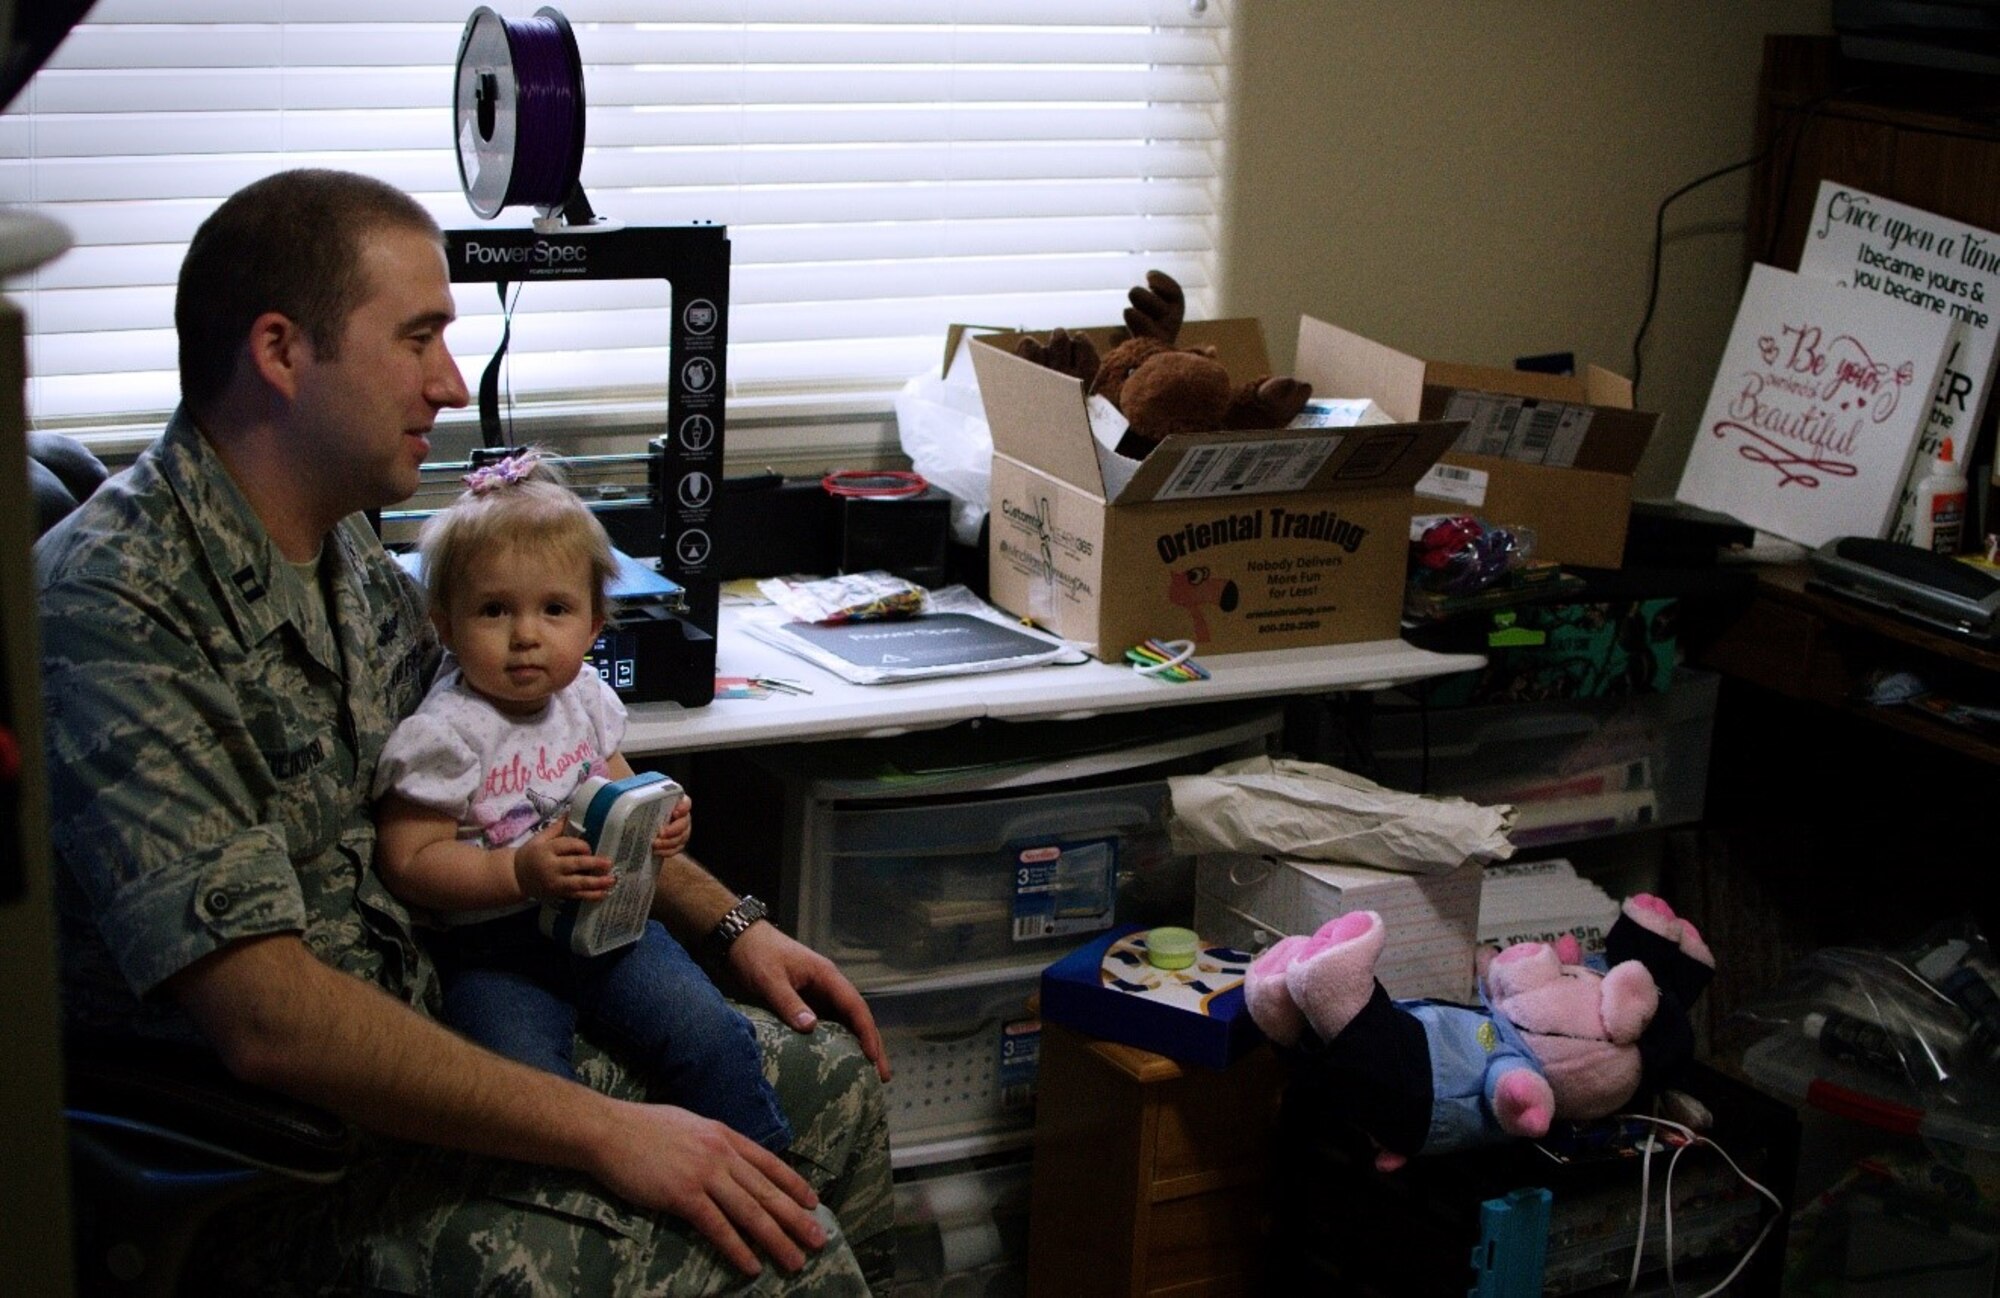 Capt. Jeremy Kulikowski, Air Force Life Cycle Management Center cyber mobile command and control systems officer, waits with his daughter, Kambri, for toy gastrostomy tubes to be 3-D printed so his wife, Kortni, can sew them onto stuffed animals, April 12, 2018. Their daughter, who was diagnosed with duplication syndrome when she was born in 2017, holds the pump to her old G-tube, which was removed from her stomach April 4, 2018. (U.S. Air Force photo by Audrey Jensen)